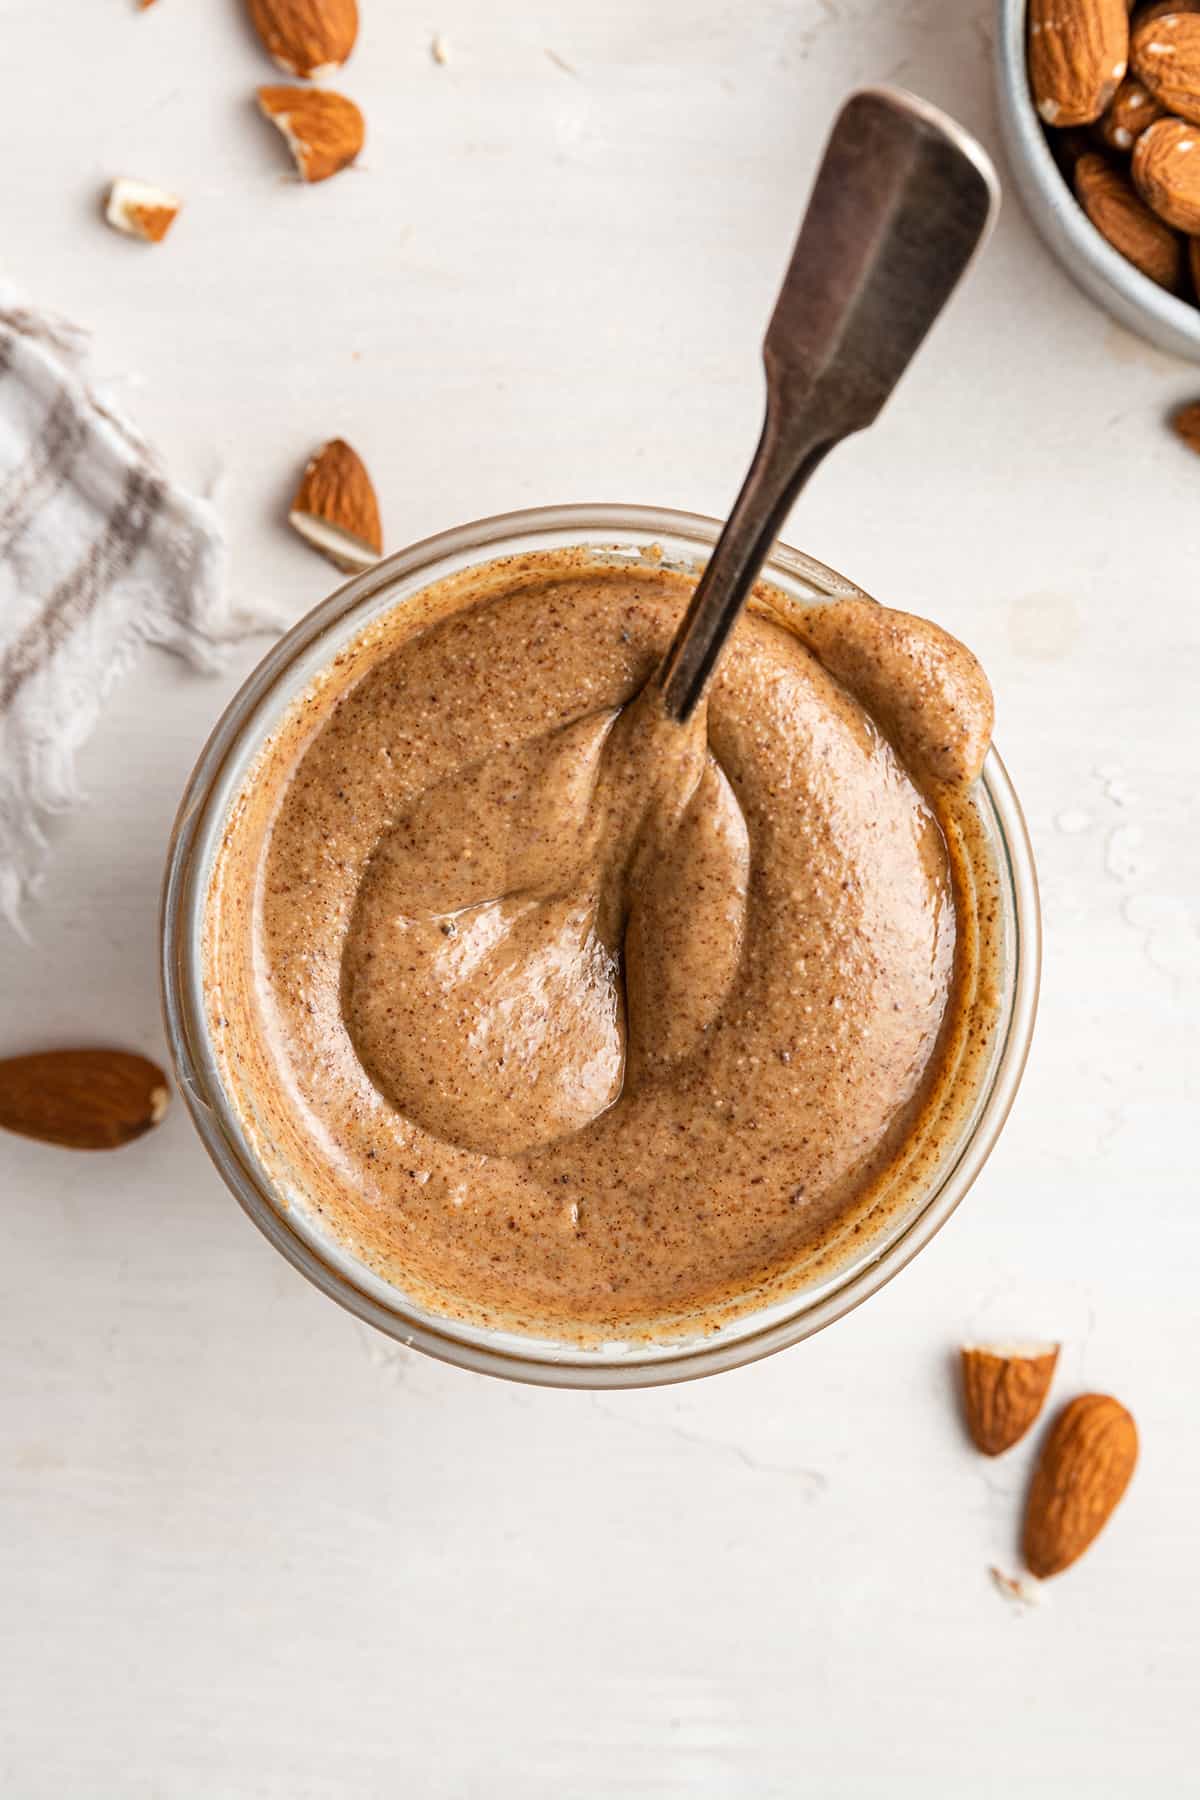 Overhead view of a jar of pumpkin spice almond butter, with a spoon fully submerged in it, surrounded by almonds and a kitchen towel